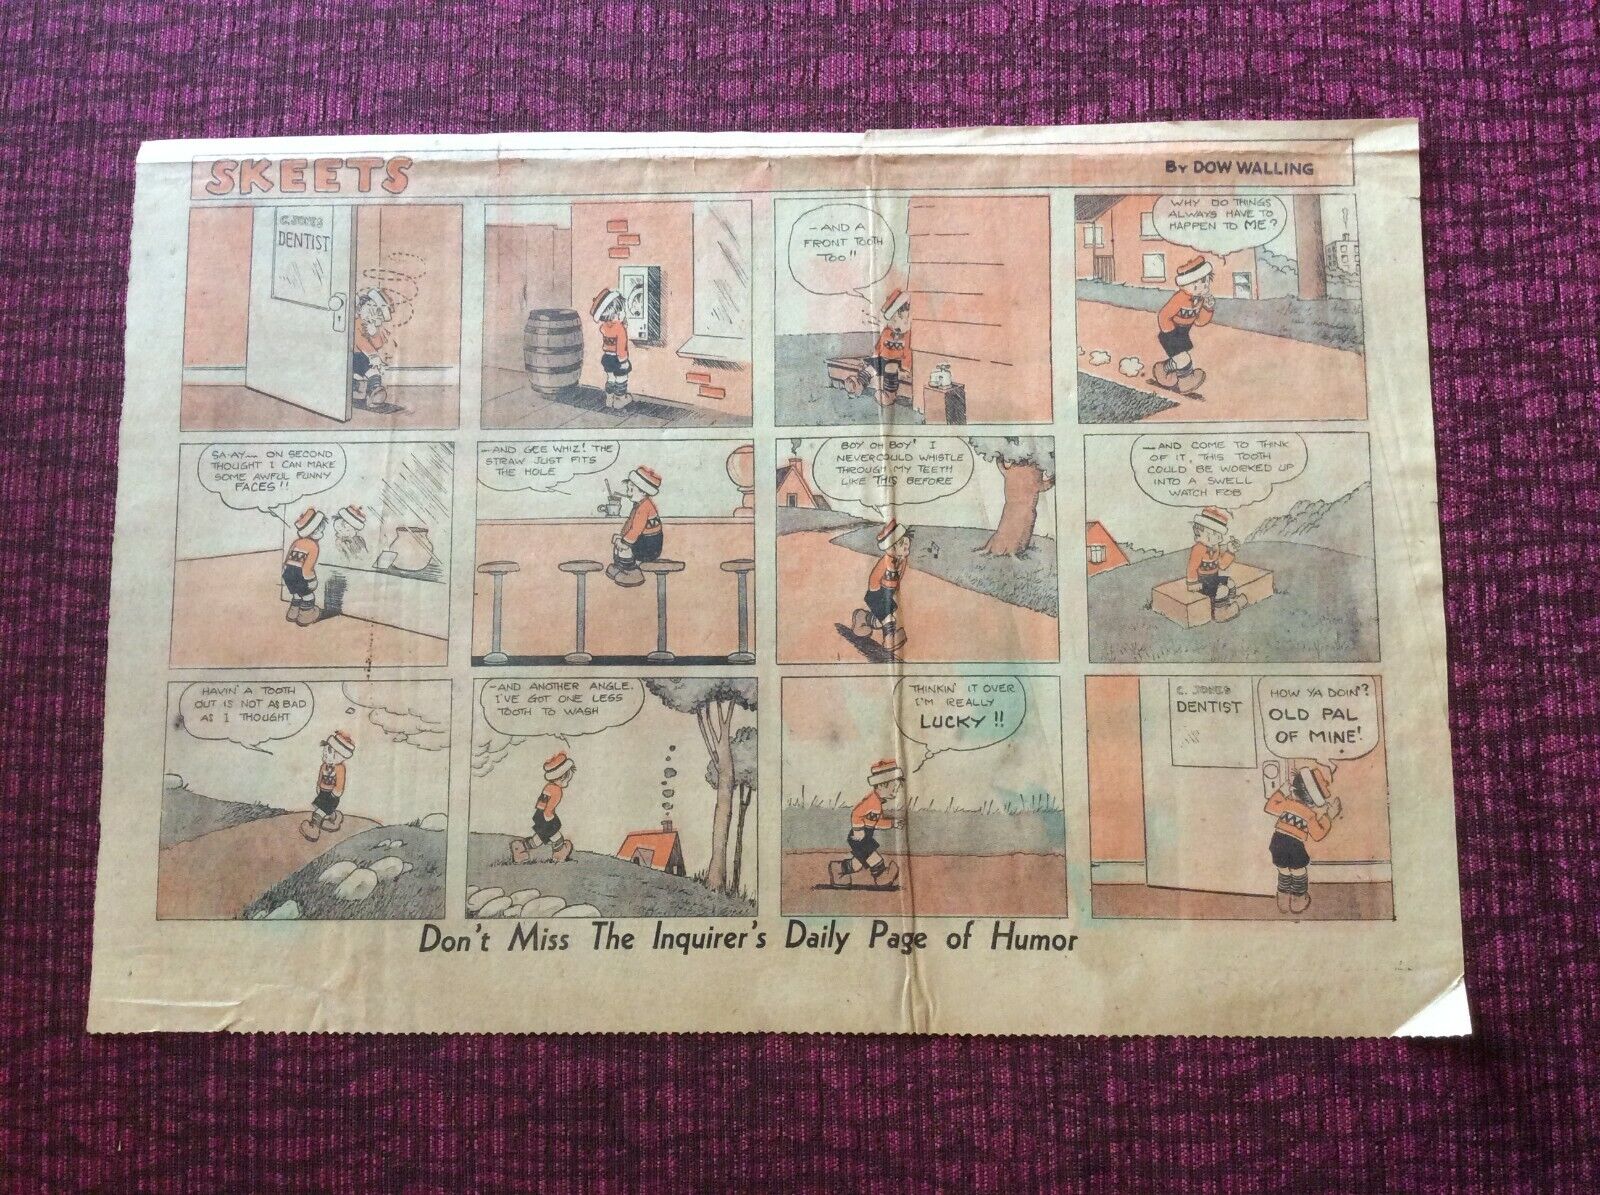 #01  SKEETS by Dow Walling Sunday Half Page Strip May 8, 1938 